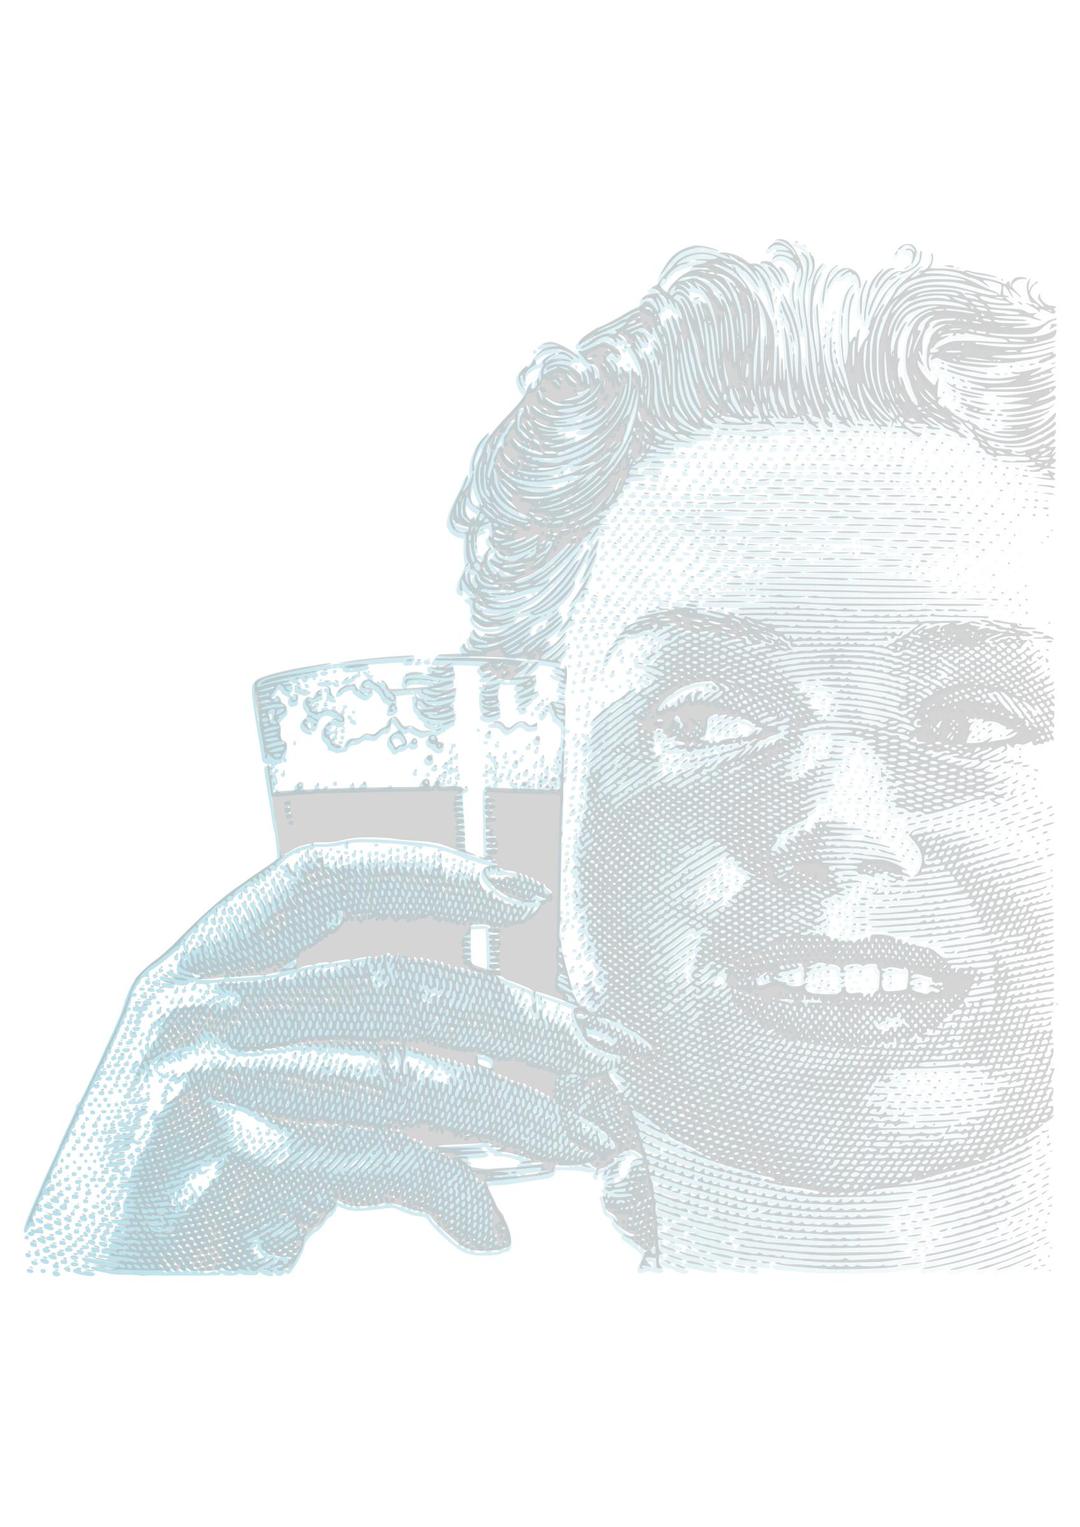 Happy woman drinking 05 png transparent